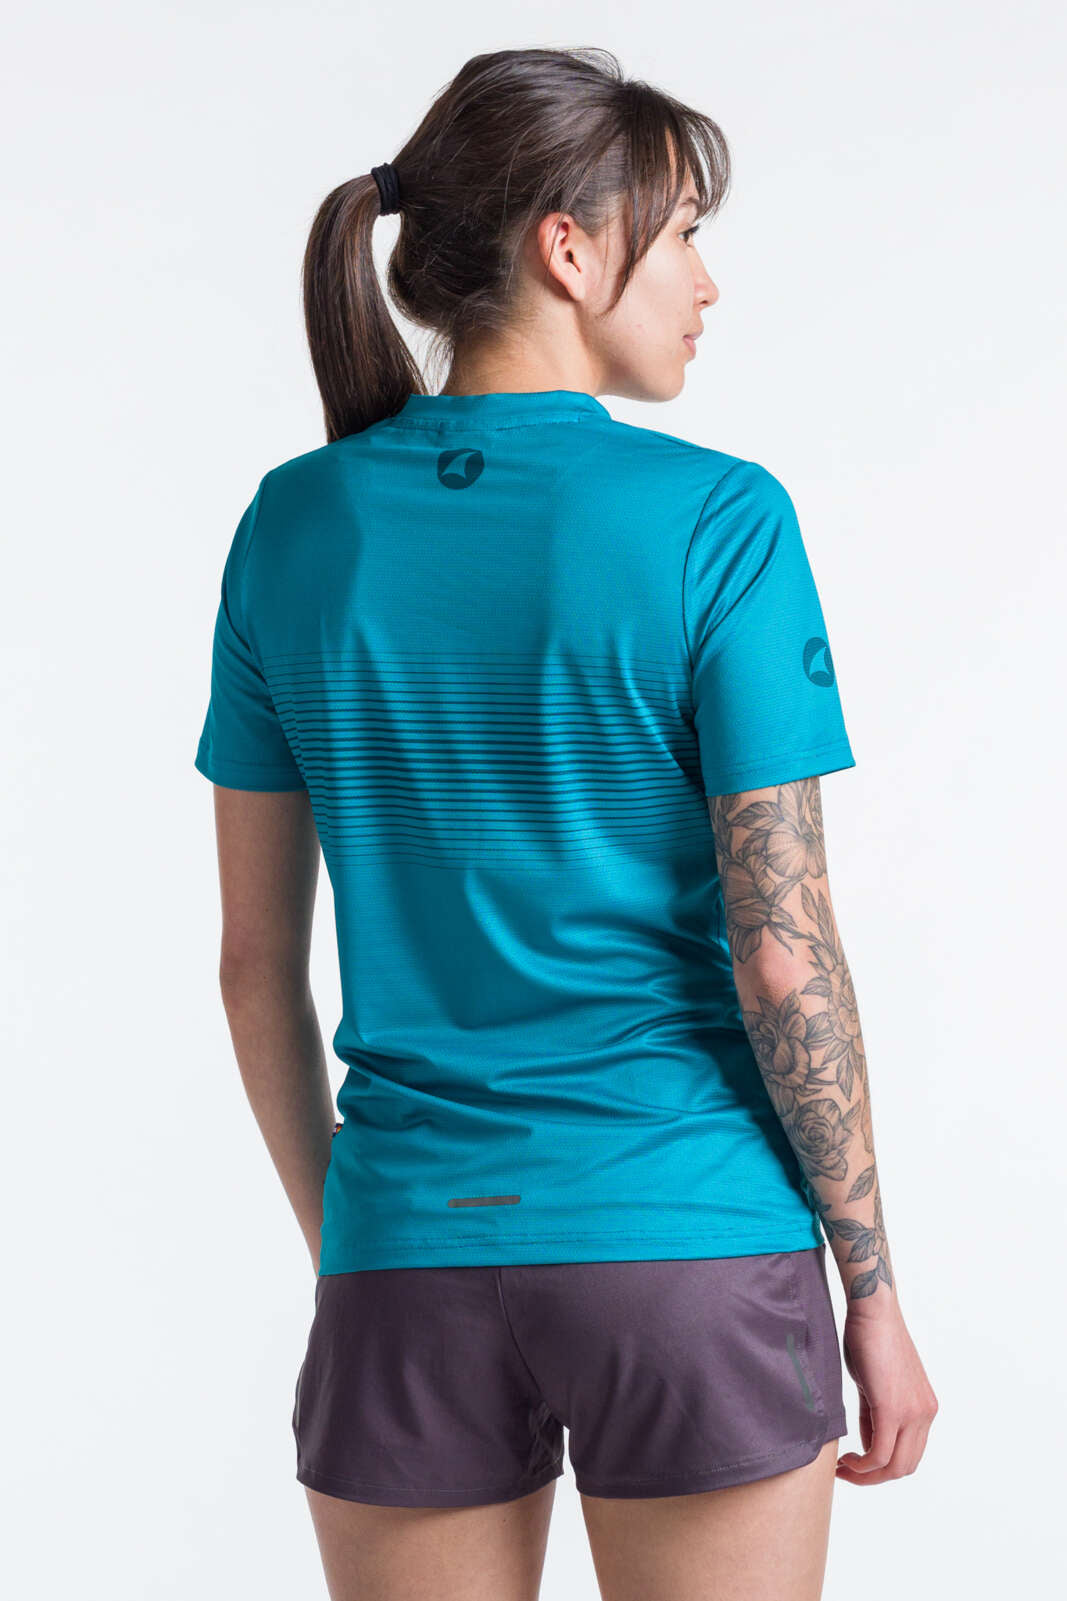 Women\'s Teal Running Shirt Pactimo | Breathable Lightweight & 